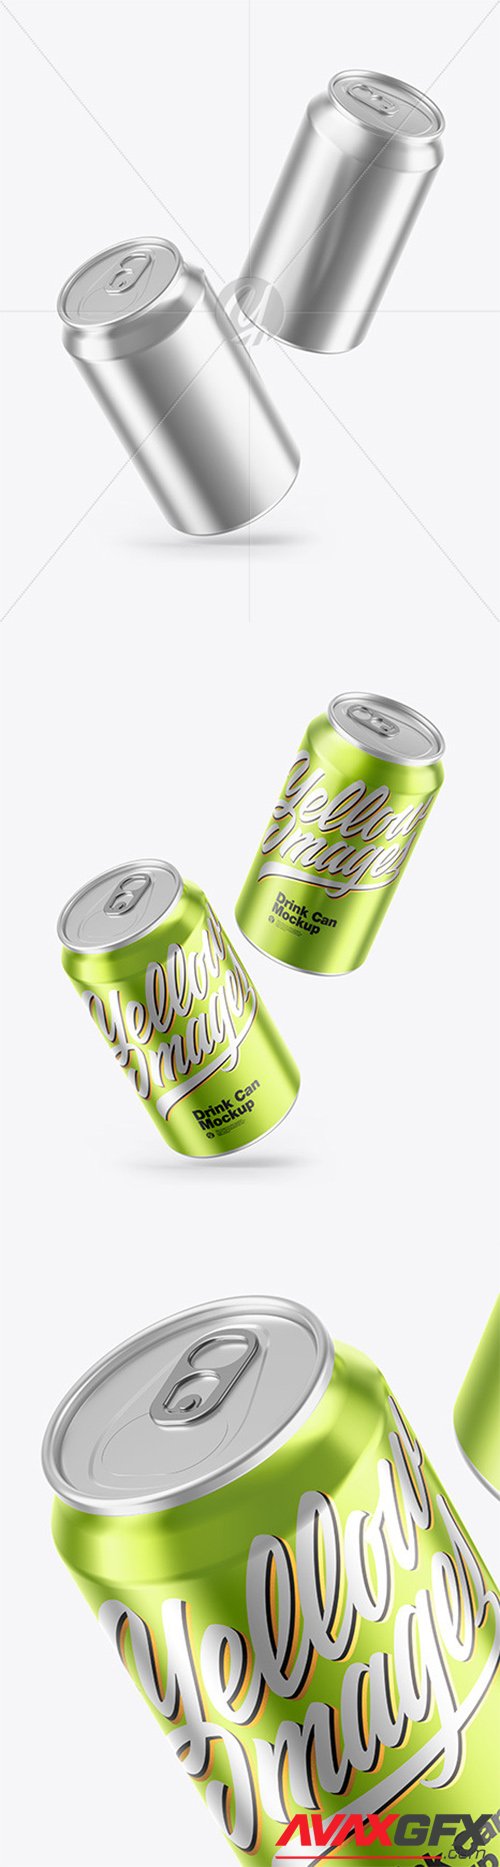 Download Yellowimages Mockups Dispenser Glossy Metallic Cans Branding Mockups Yellowimages Mockups